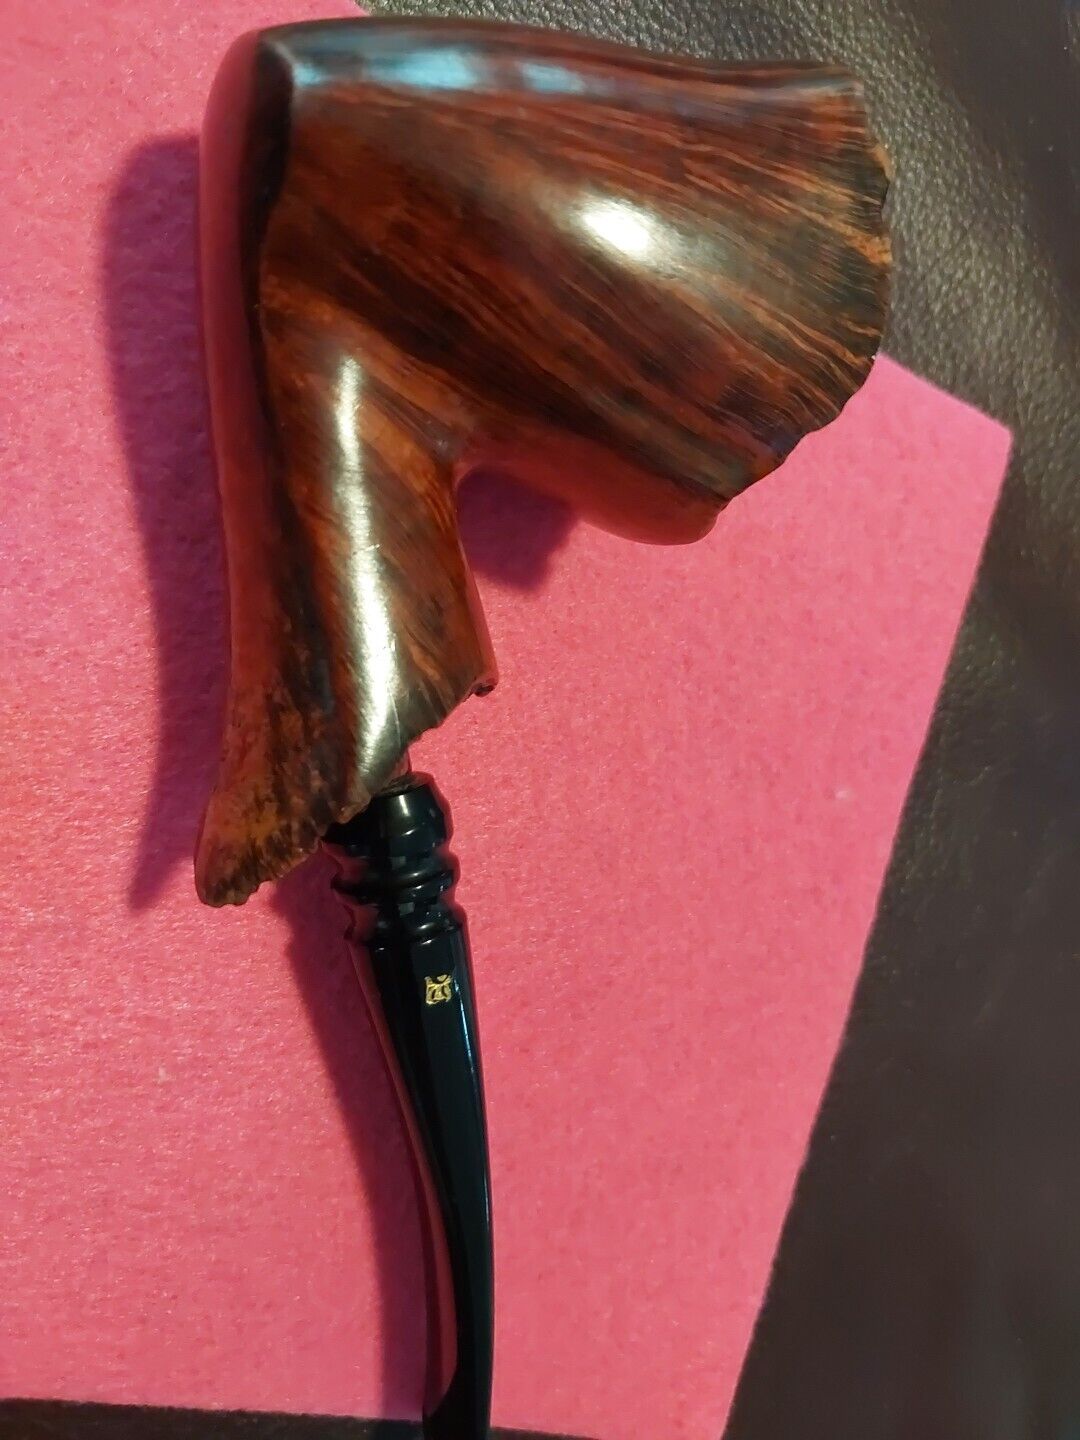 ESTATE PIPE KARL ERIK HAND MADE IN DENMARK ,SMOKED VERY LITTLE ,VERY CLEAN PIPE